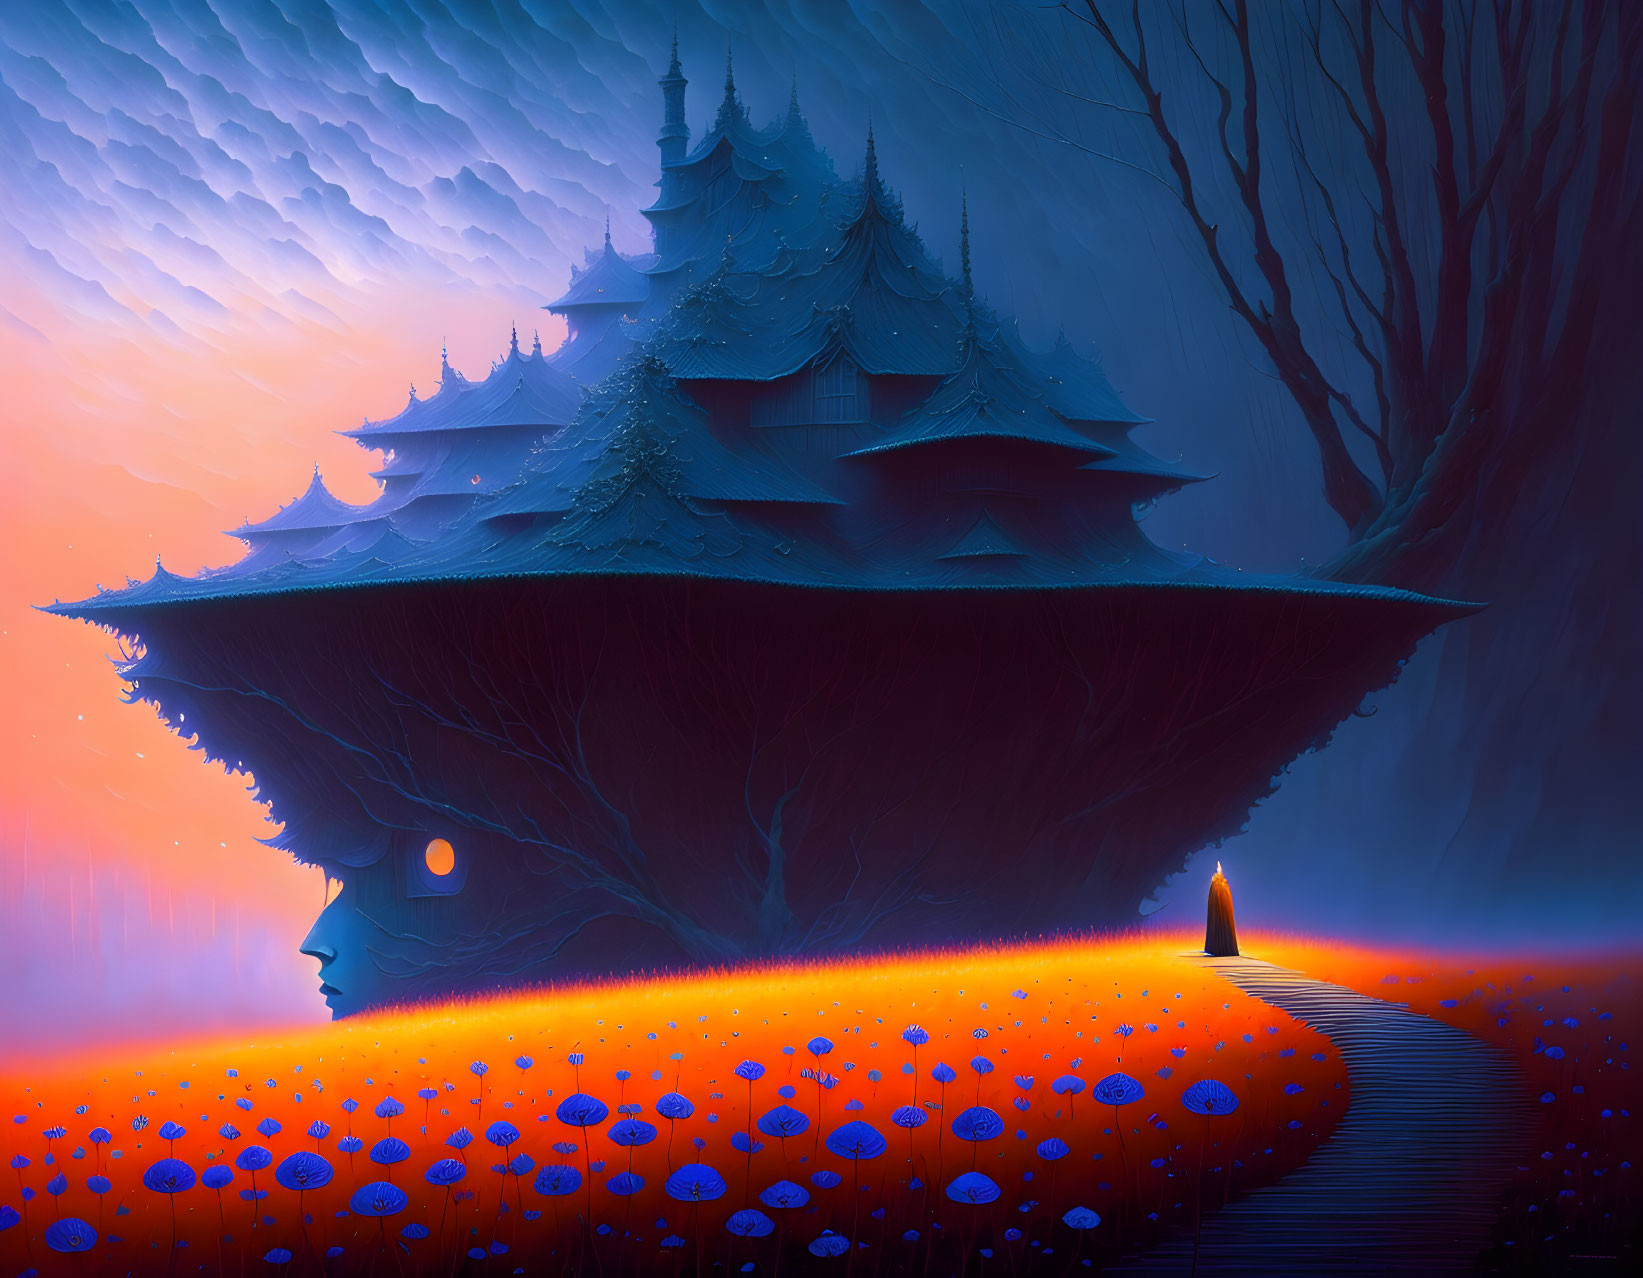 Fantasy landscape with glowing pagoda on inverted landmass